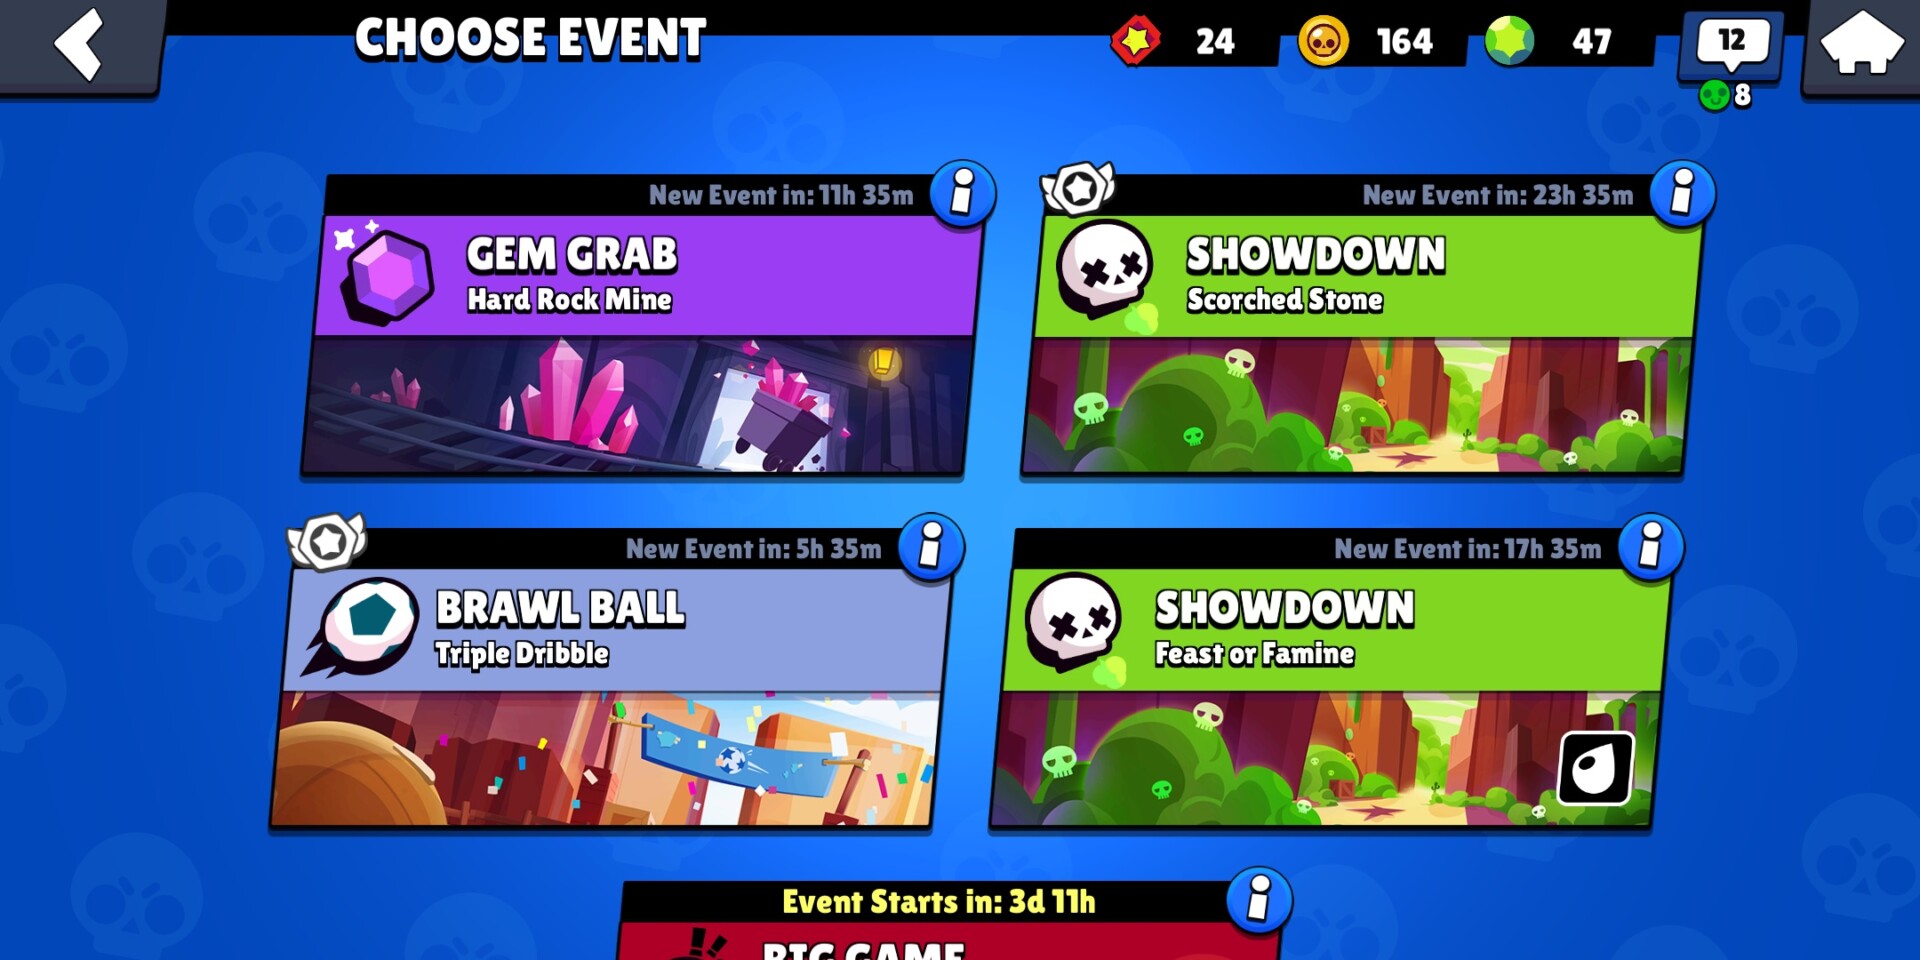 Brawl stars review event game modes rotation